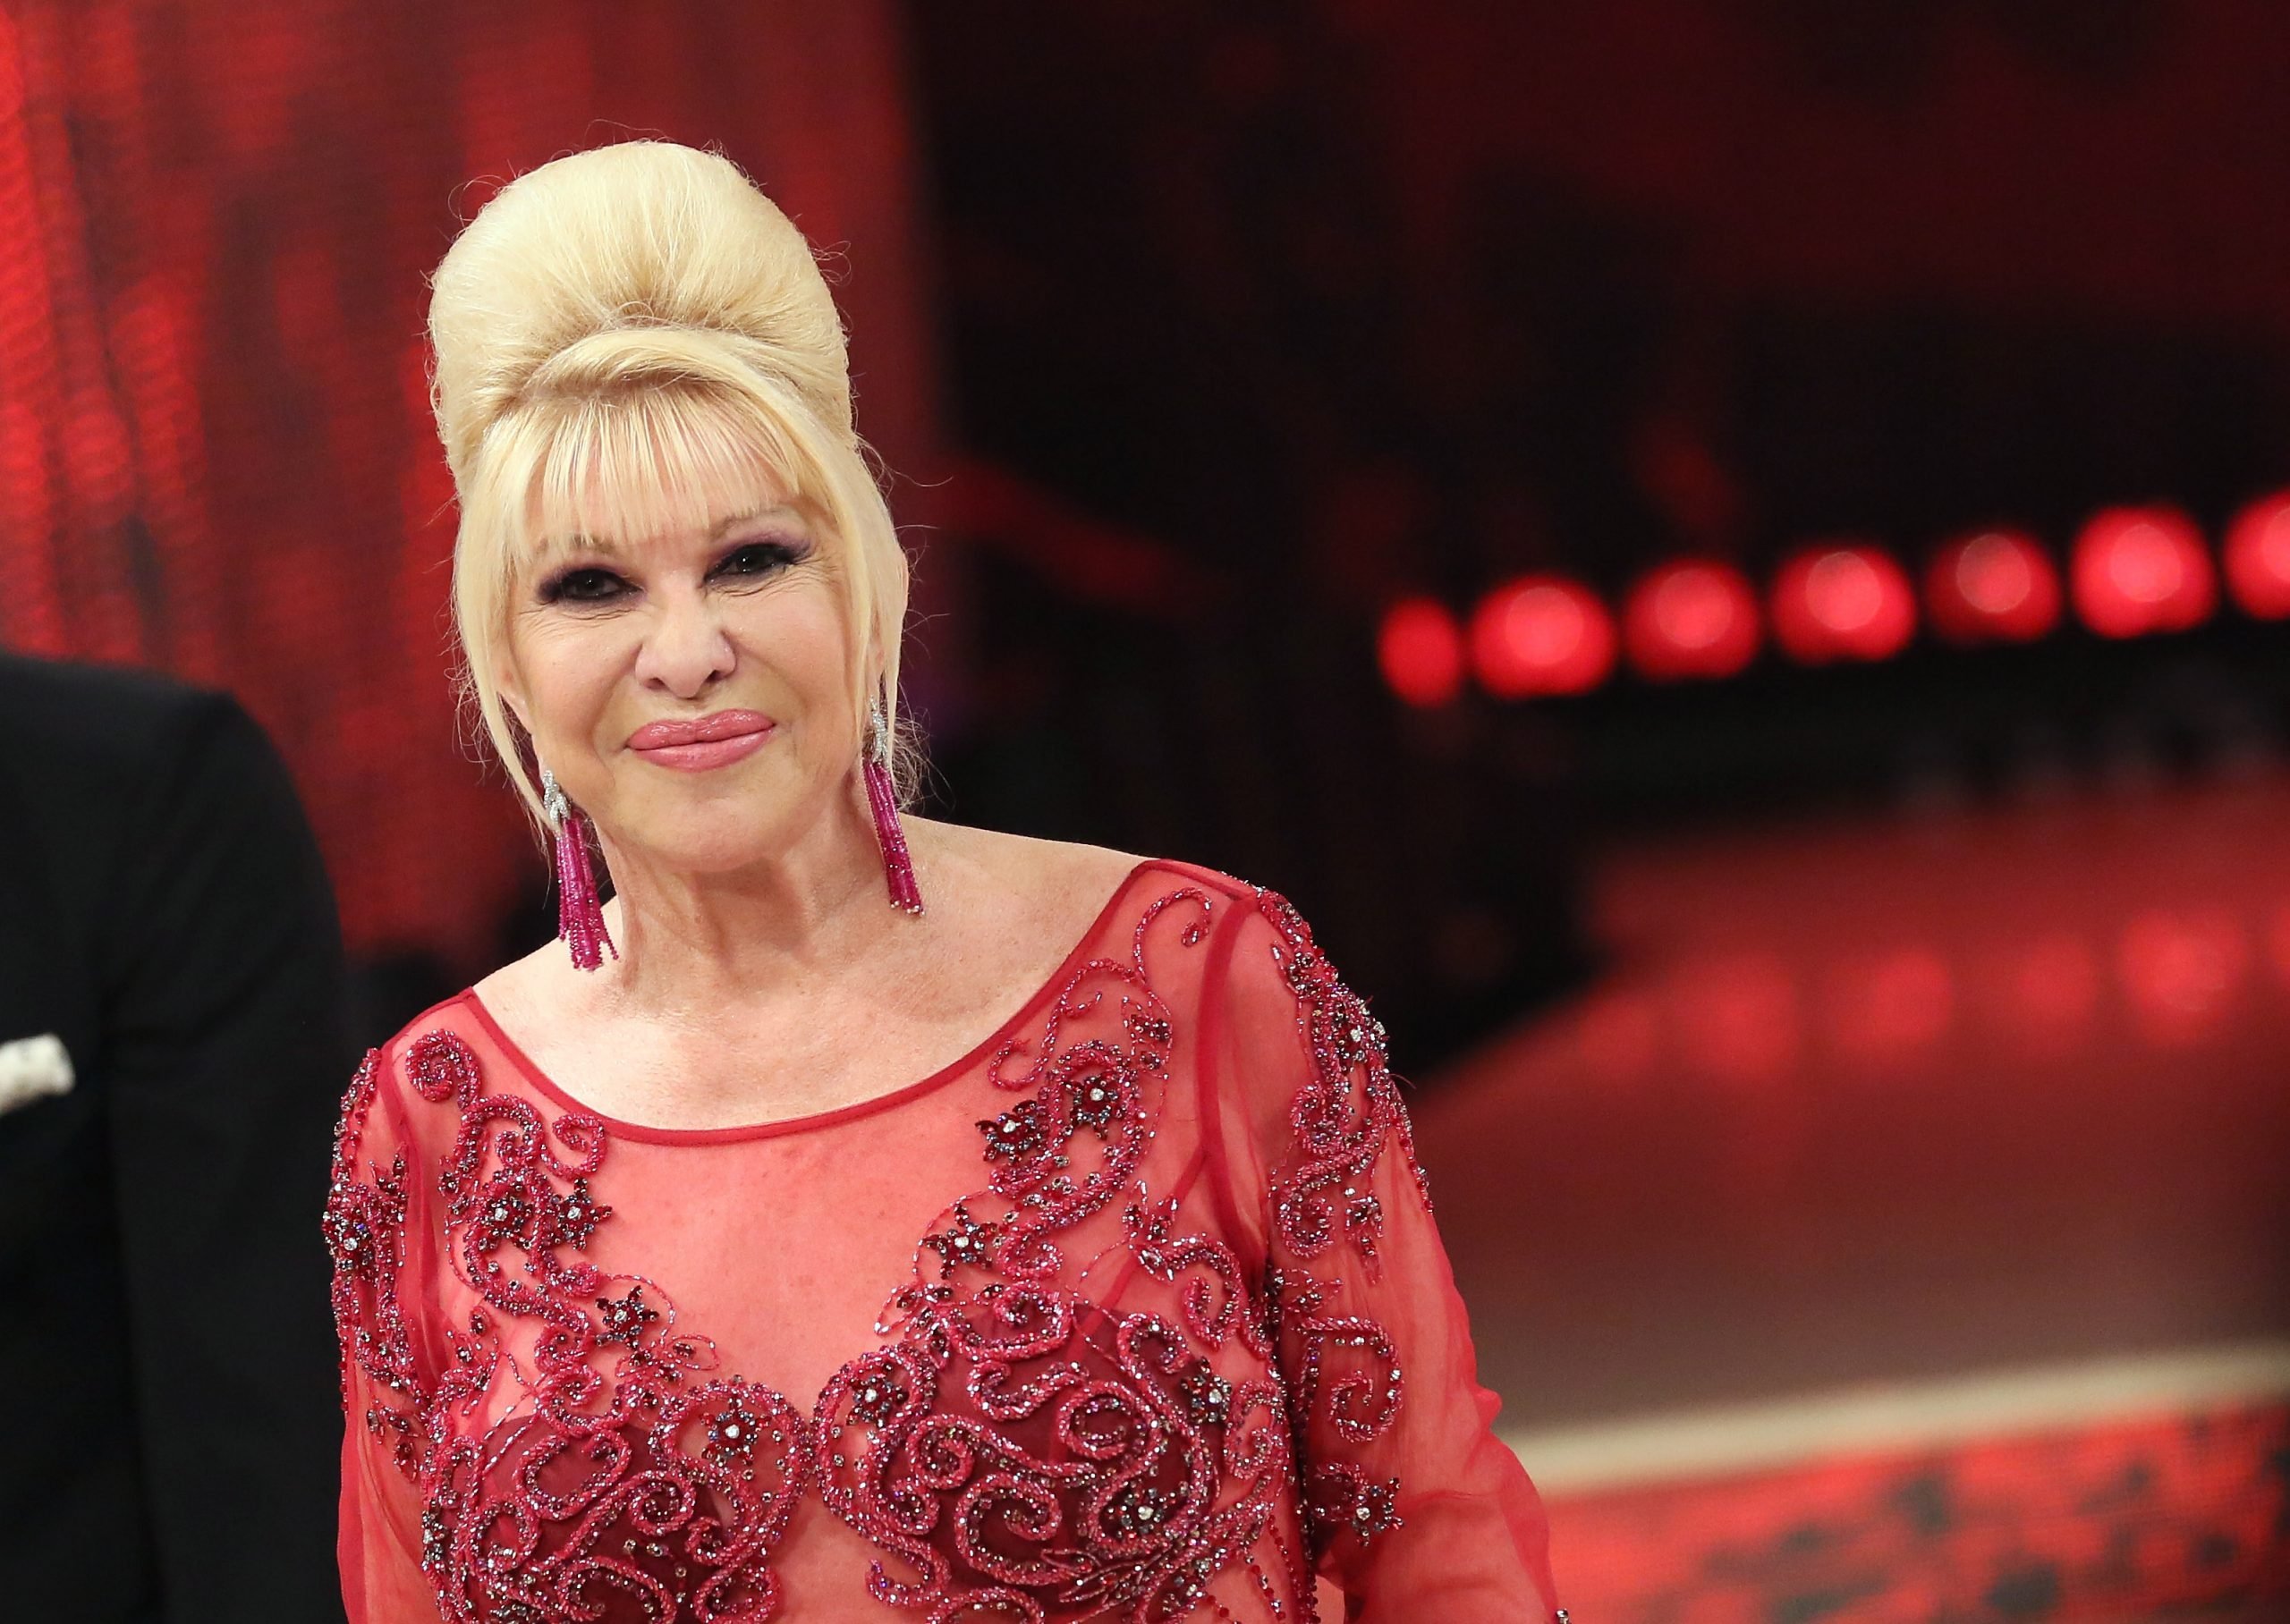 Ivana Trump, first wife of Donald Trump, appears on the Italian TV show, Ballando Con Le Stelle (Dancing With the Stars)